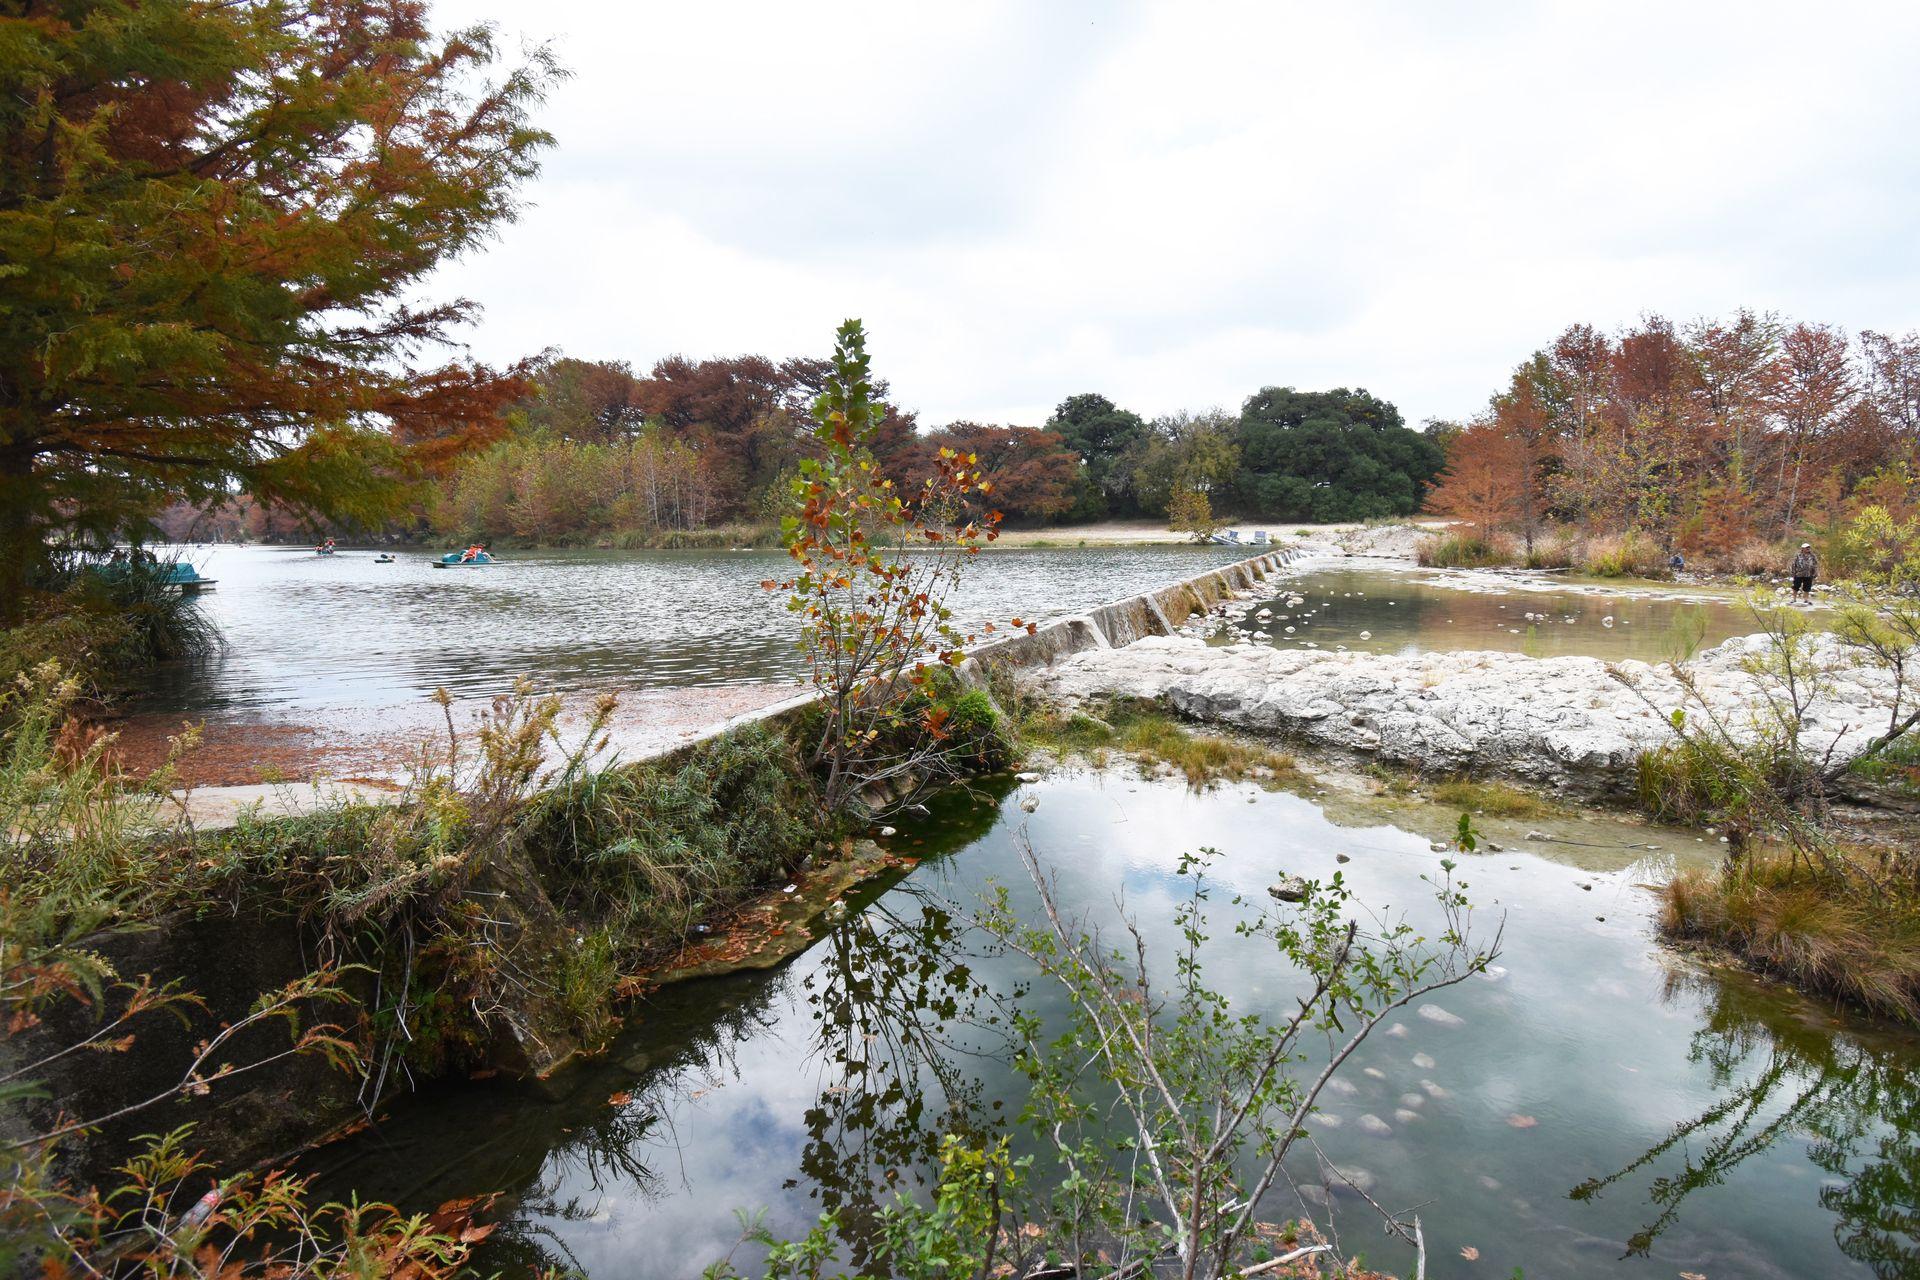 A view of the Frio River in Garner State Park in the fall. Trees with fall foliage surround the water.